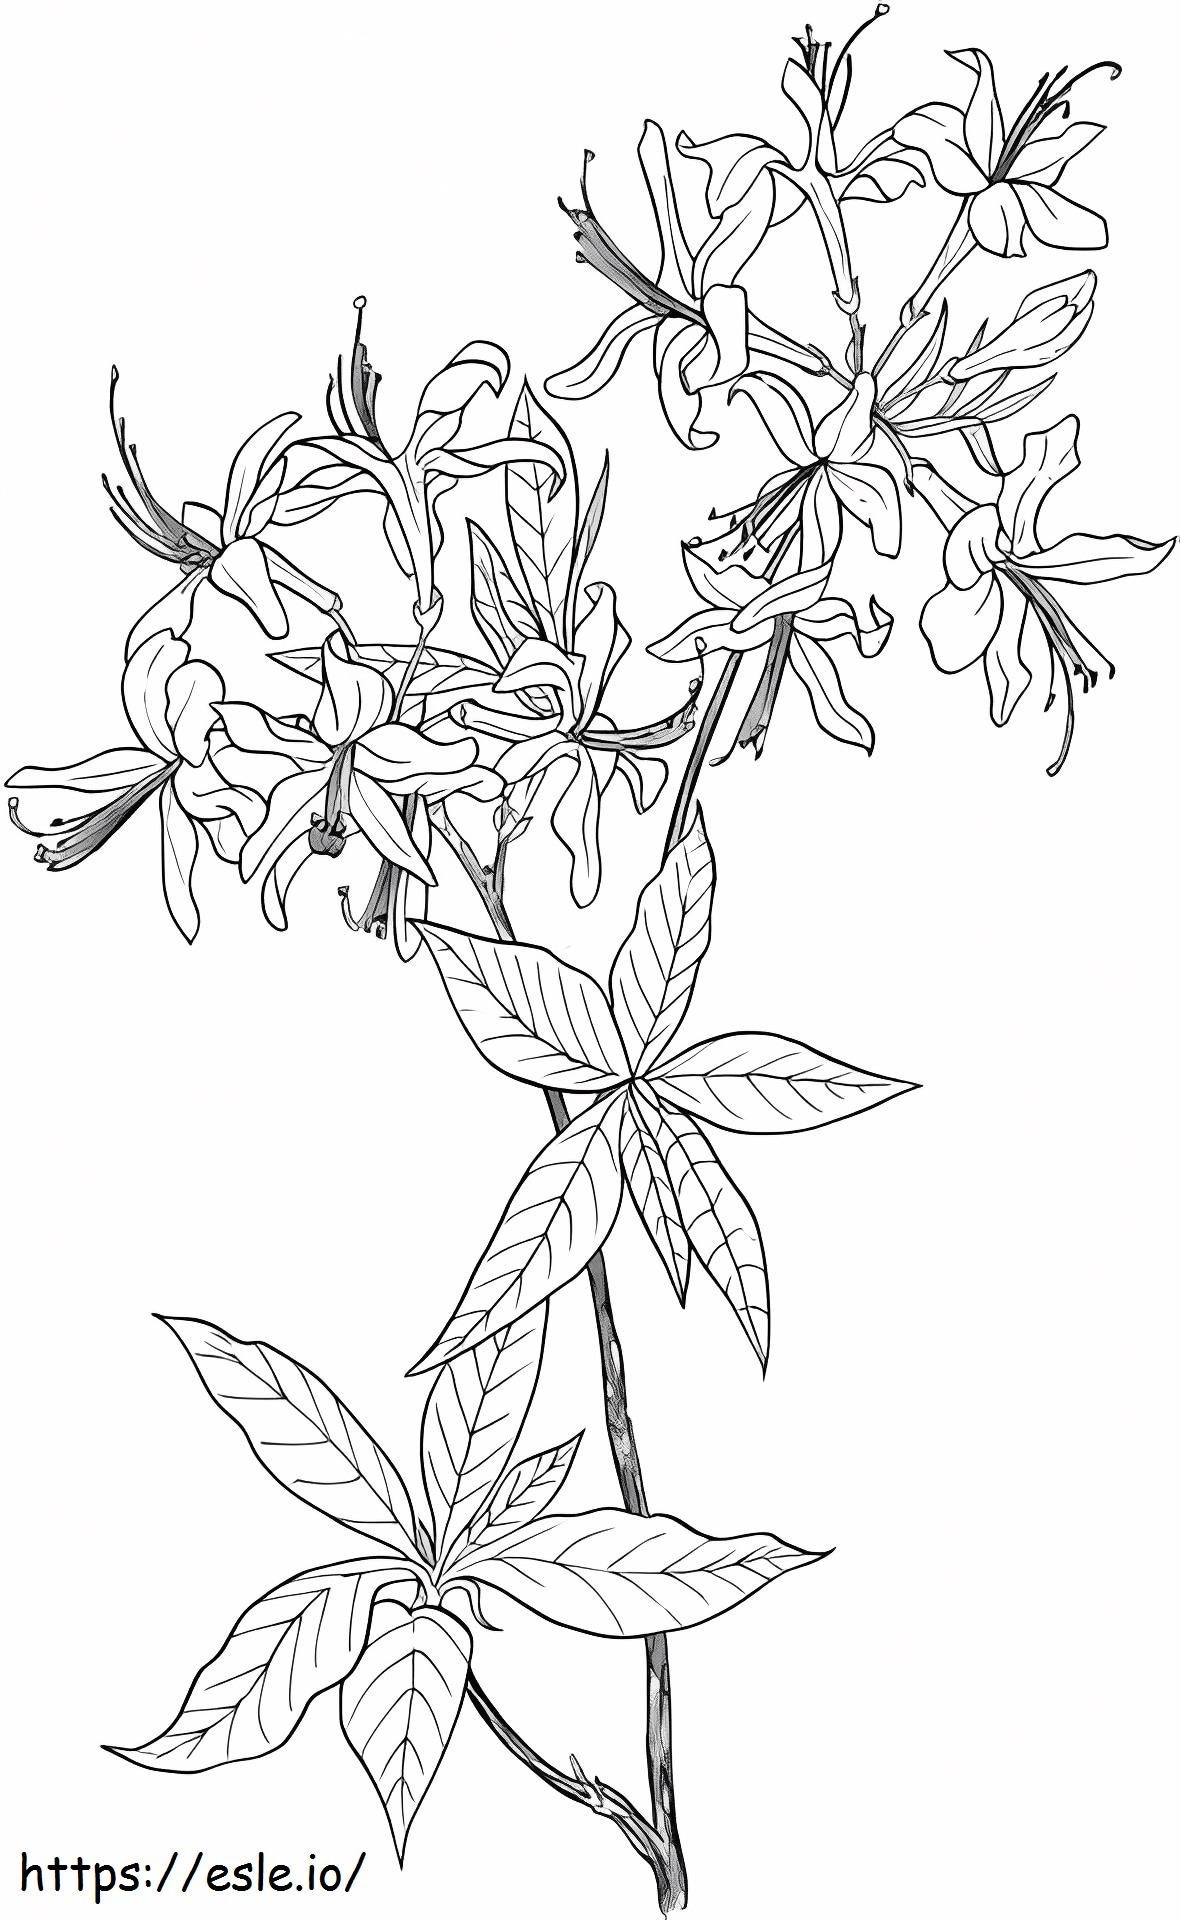 Azalea Rhododendron Wildflower coloring page